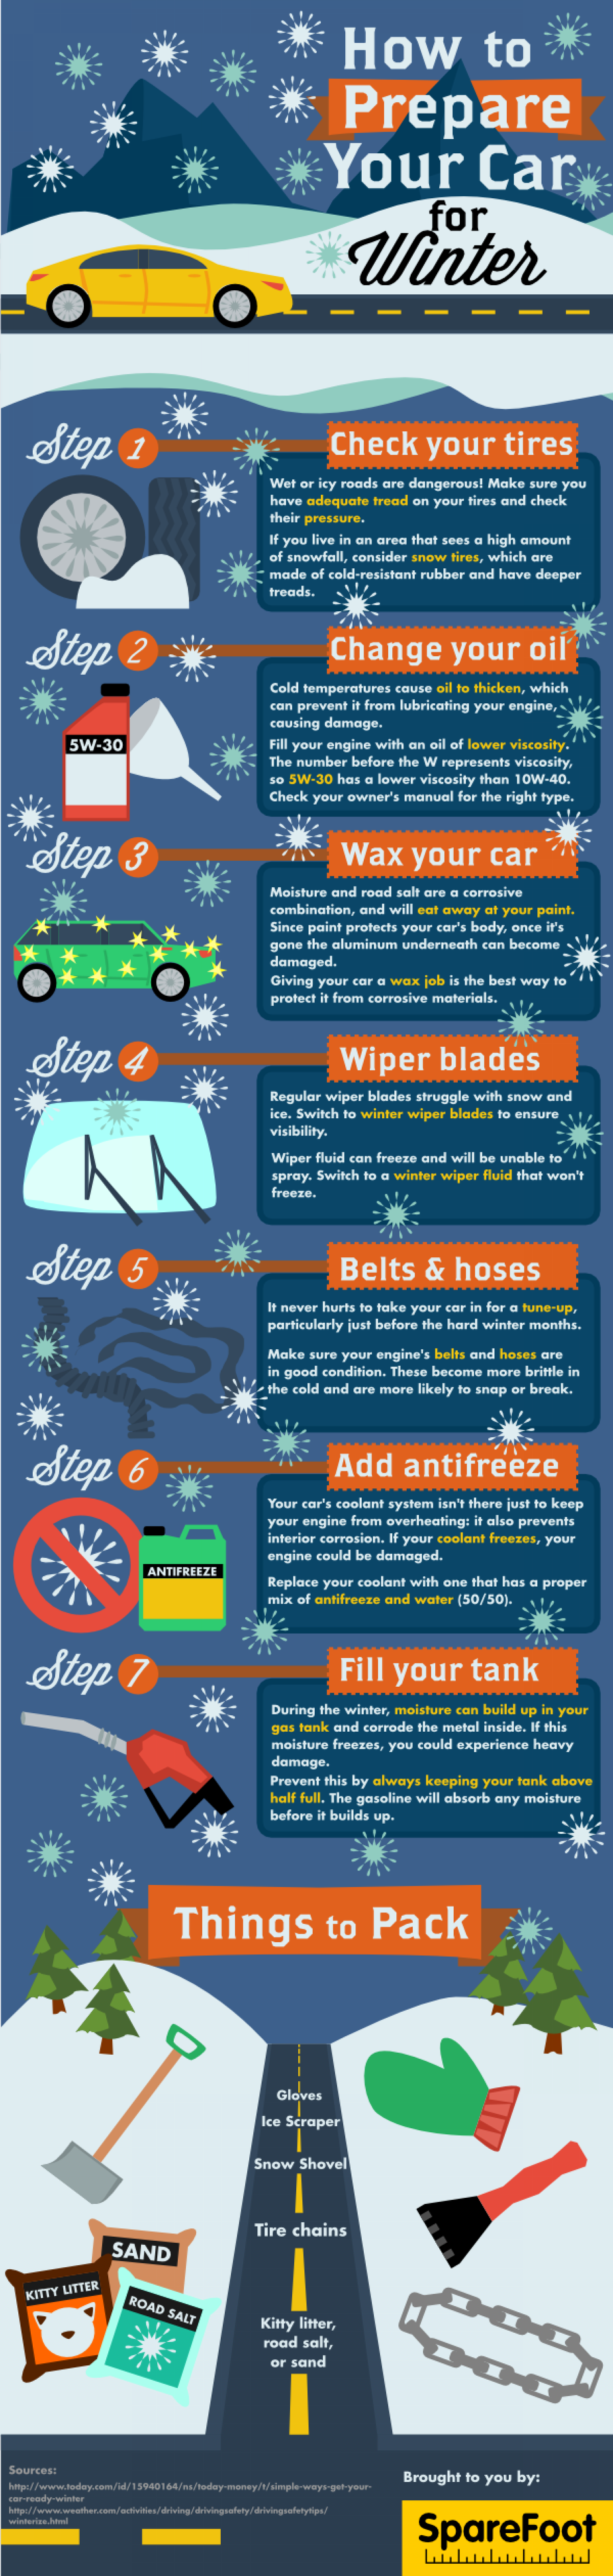 How to Prepare Your Care for Winter Infographic